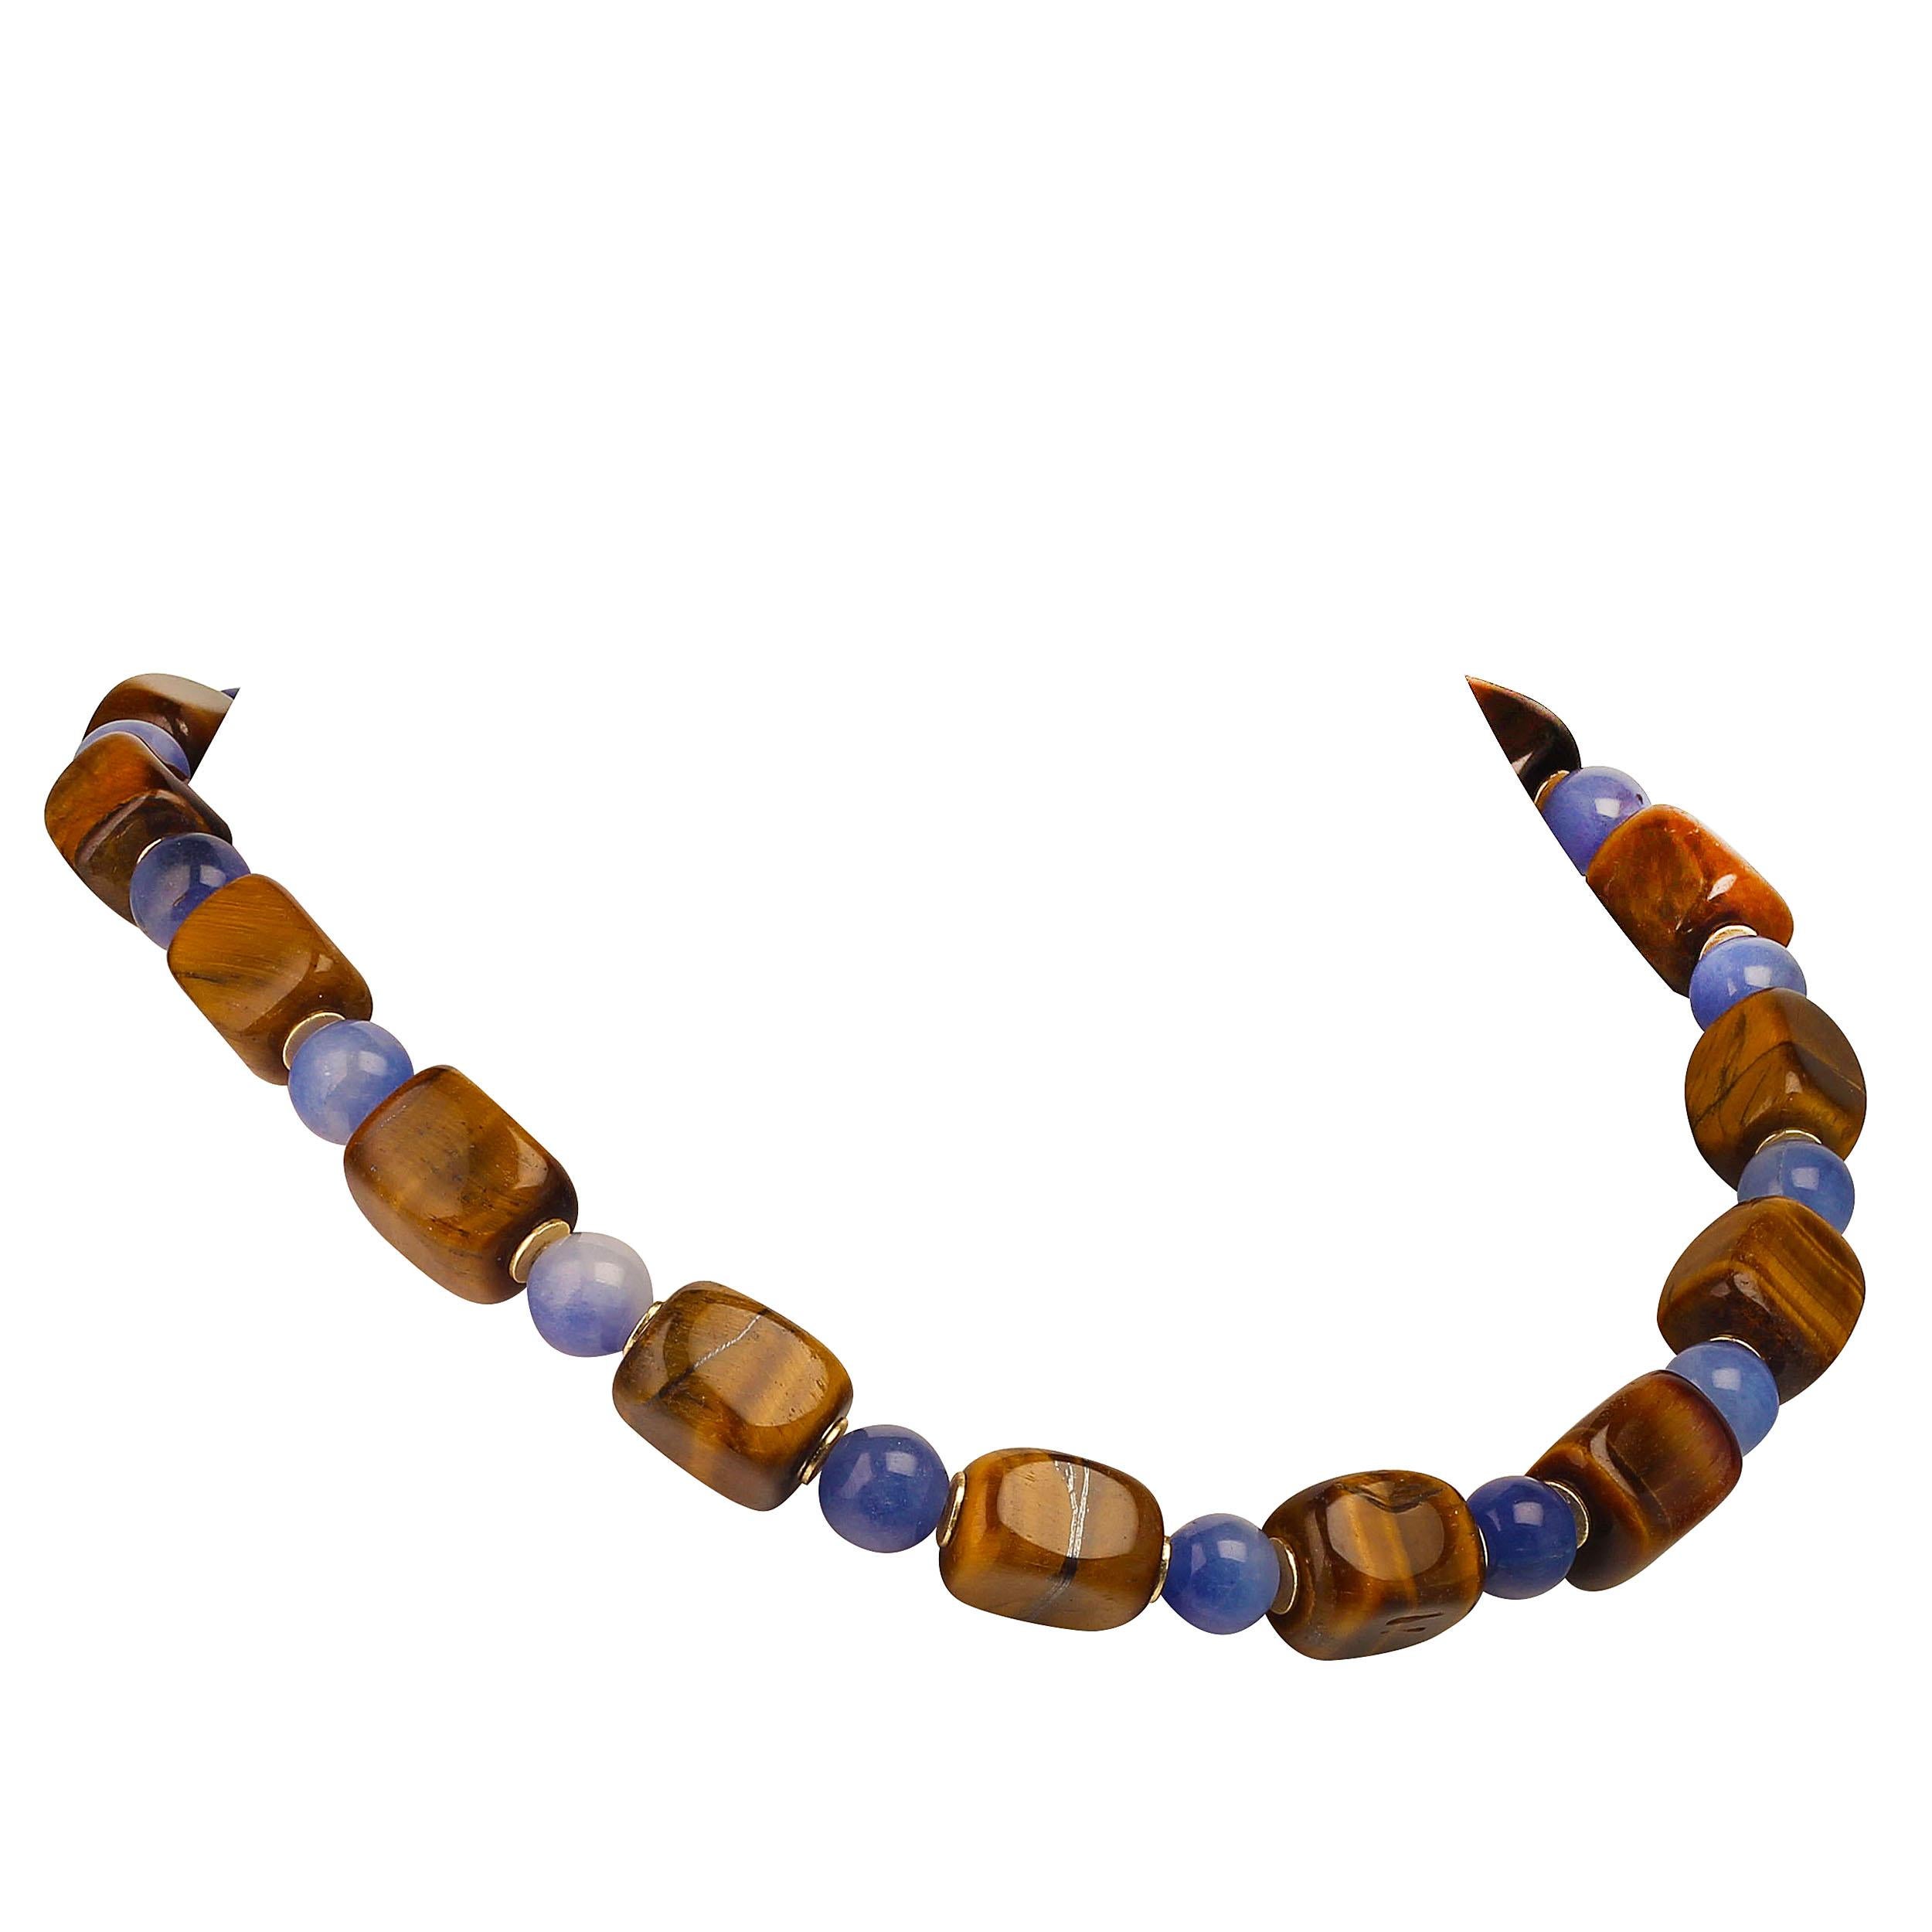 Artistic Autumn Tone Necklace of Tiger's Eye and Blue Agate 1